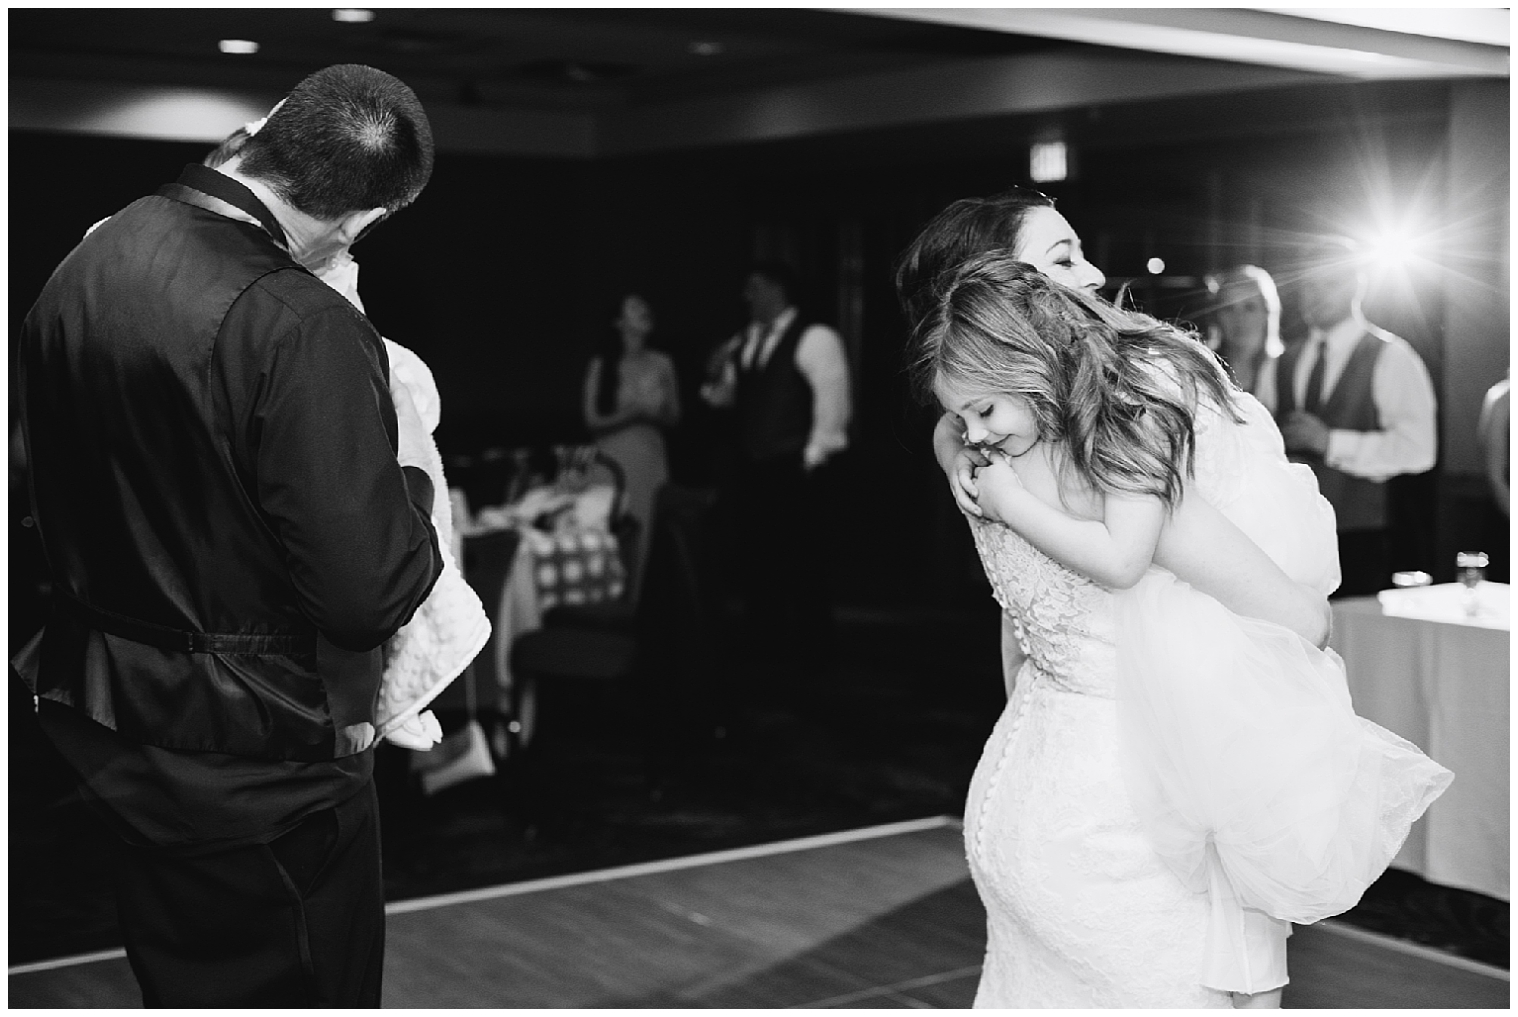 The bride and groom dance with their daughters at their Breckenridge mountain wedding.